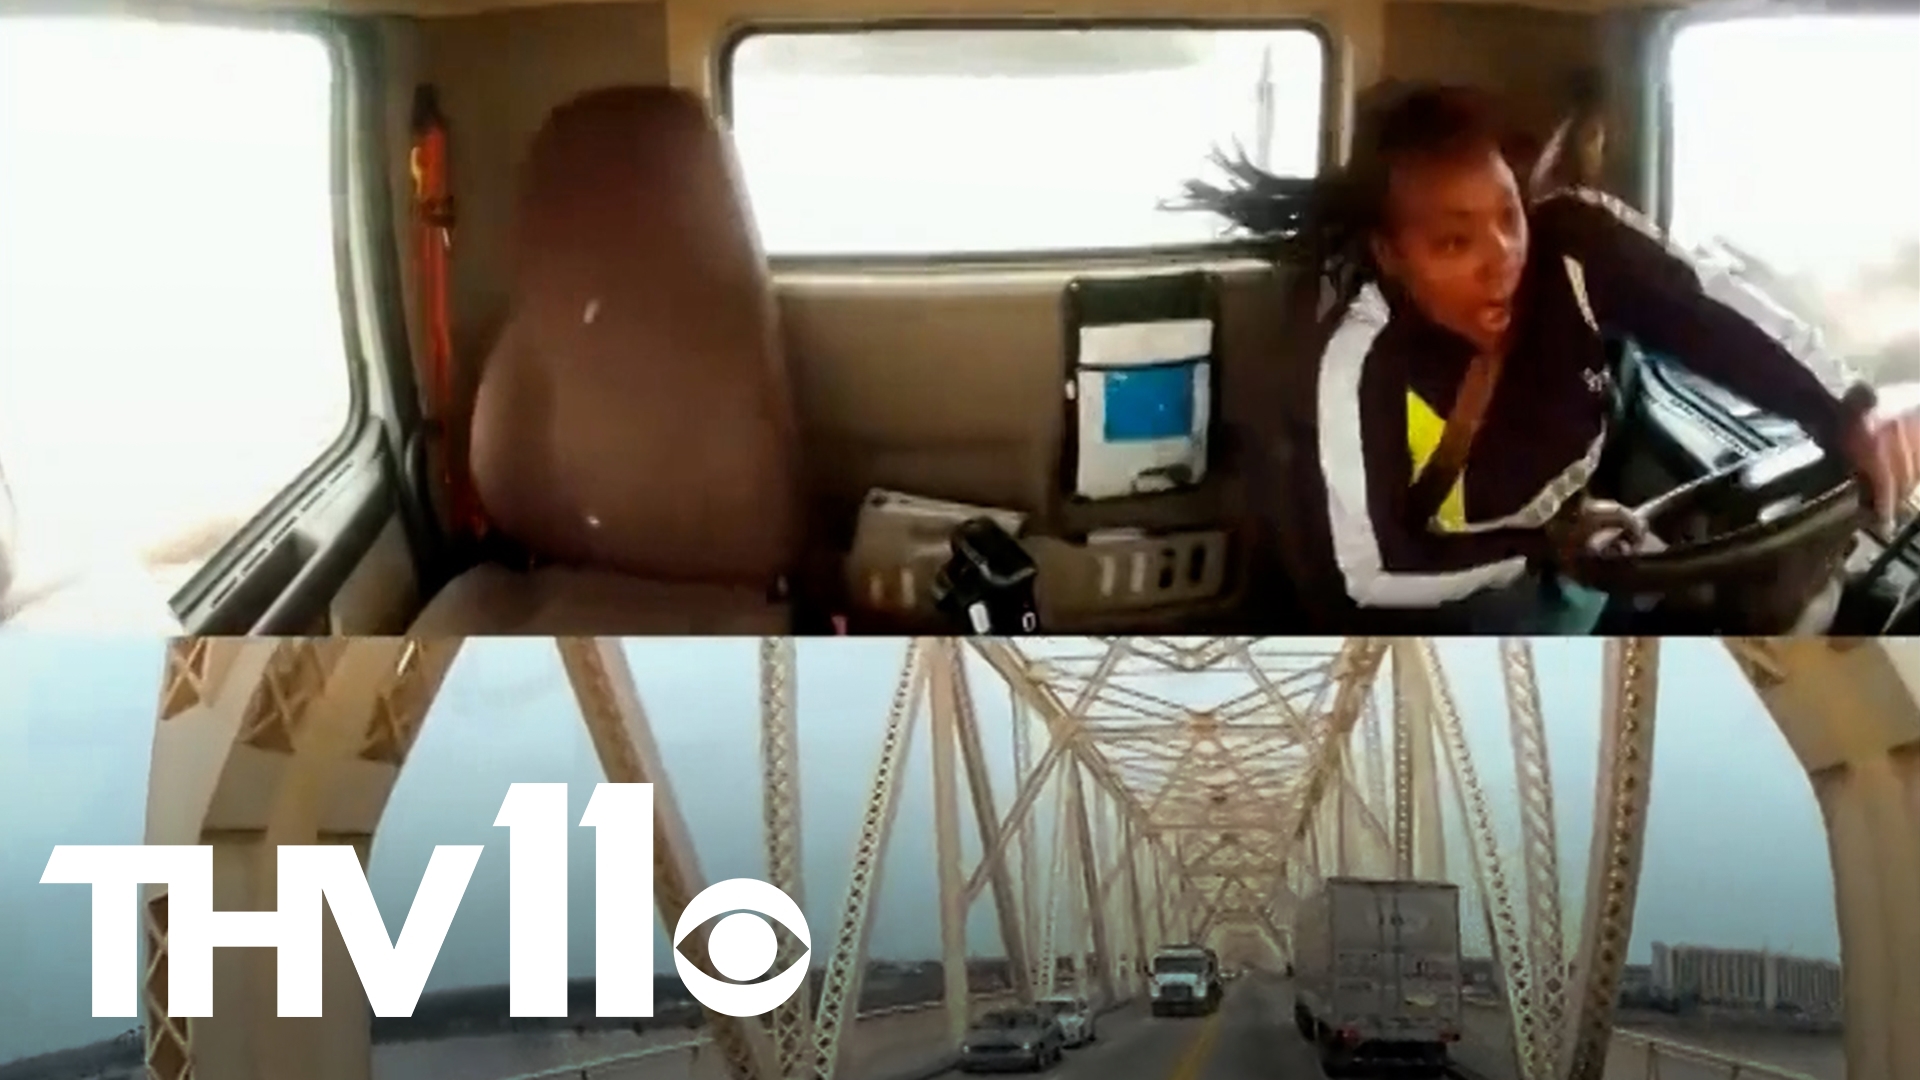 Dash cam video captured the moment a semi-truck crashed off the side of a bridge and dangled over the Ohio River in Louisville, Kentucky on March 1.